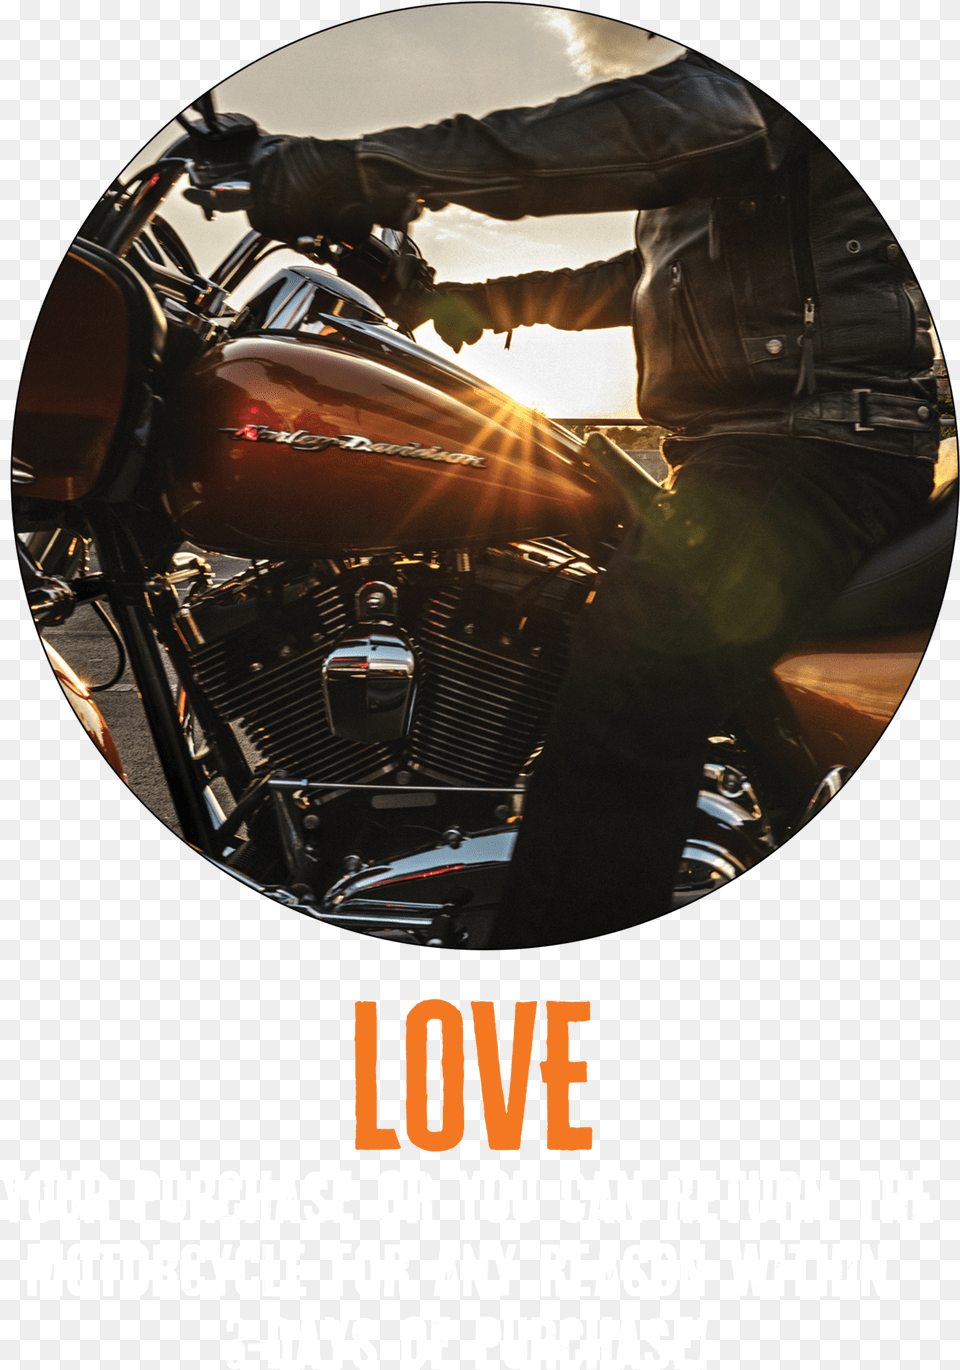 Cd, Motorcycle, Vehicle, Transportation, Person Png Image